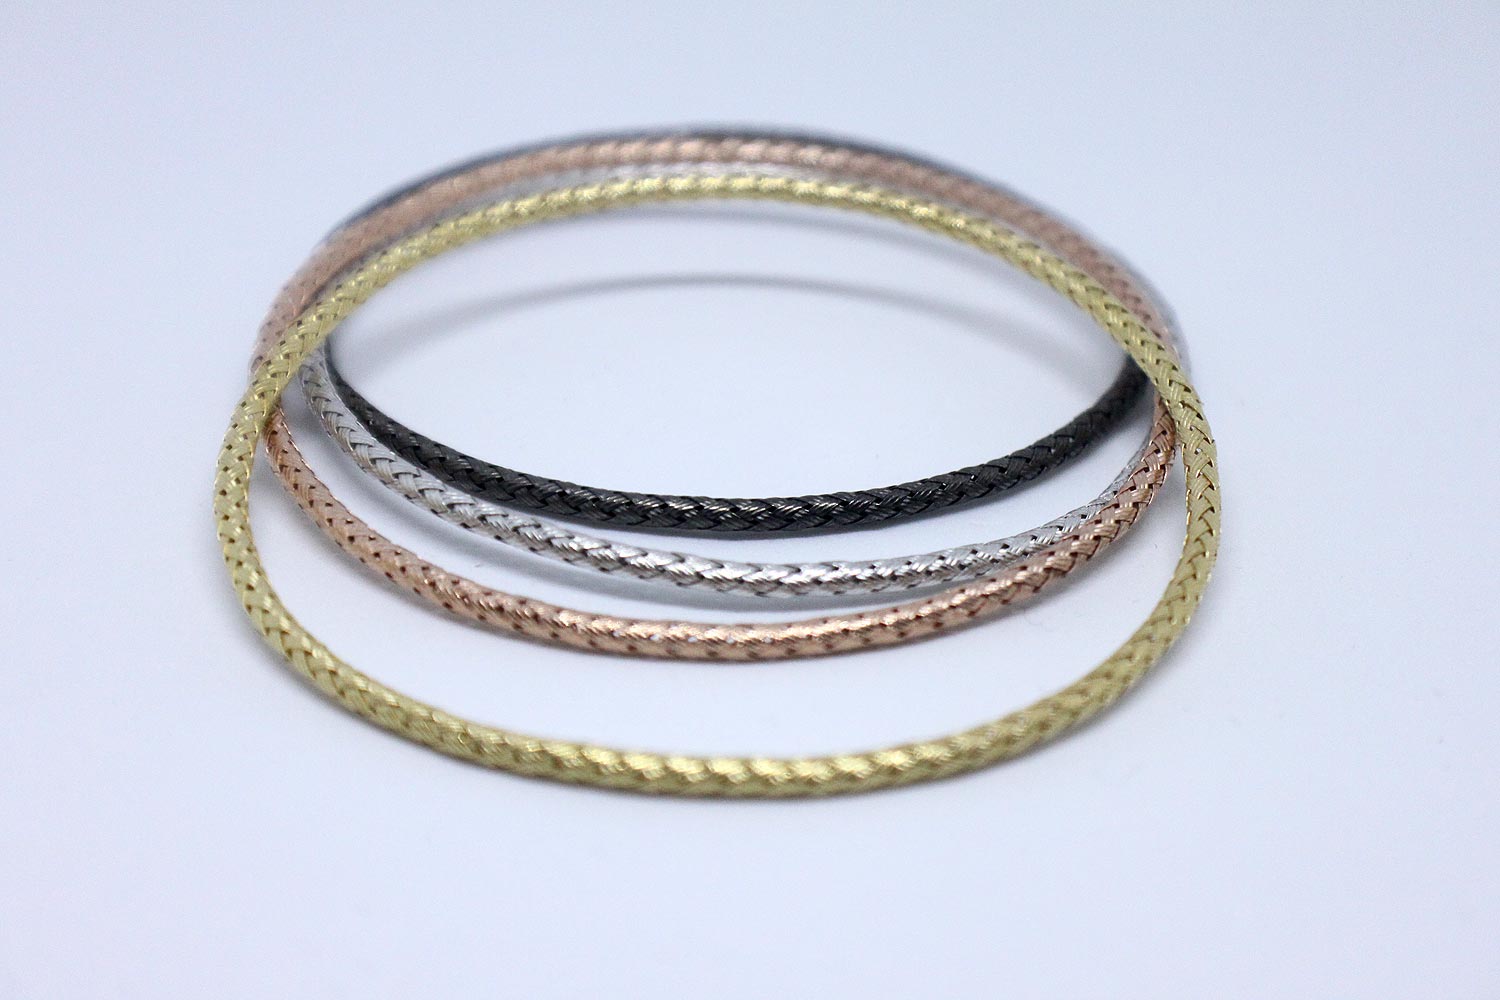 Silver bangle bracelet - available in rutenio version, gold version and rose version